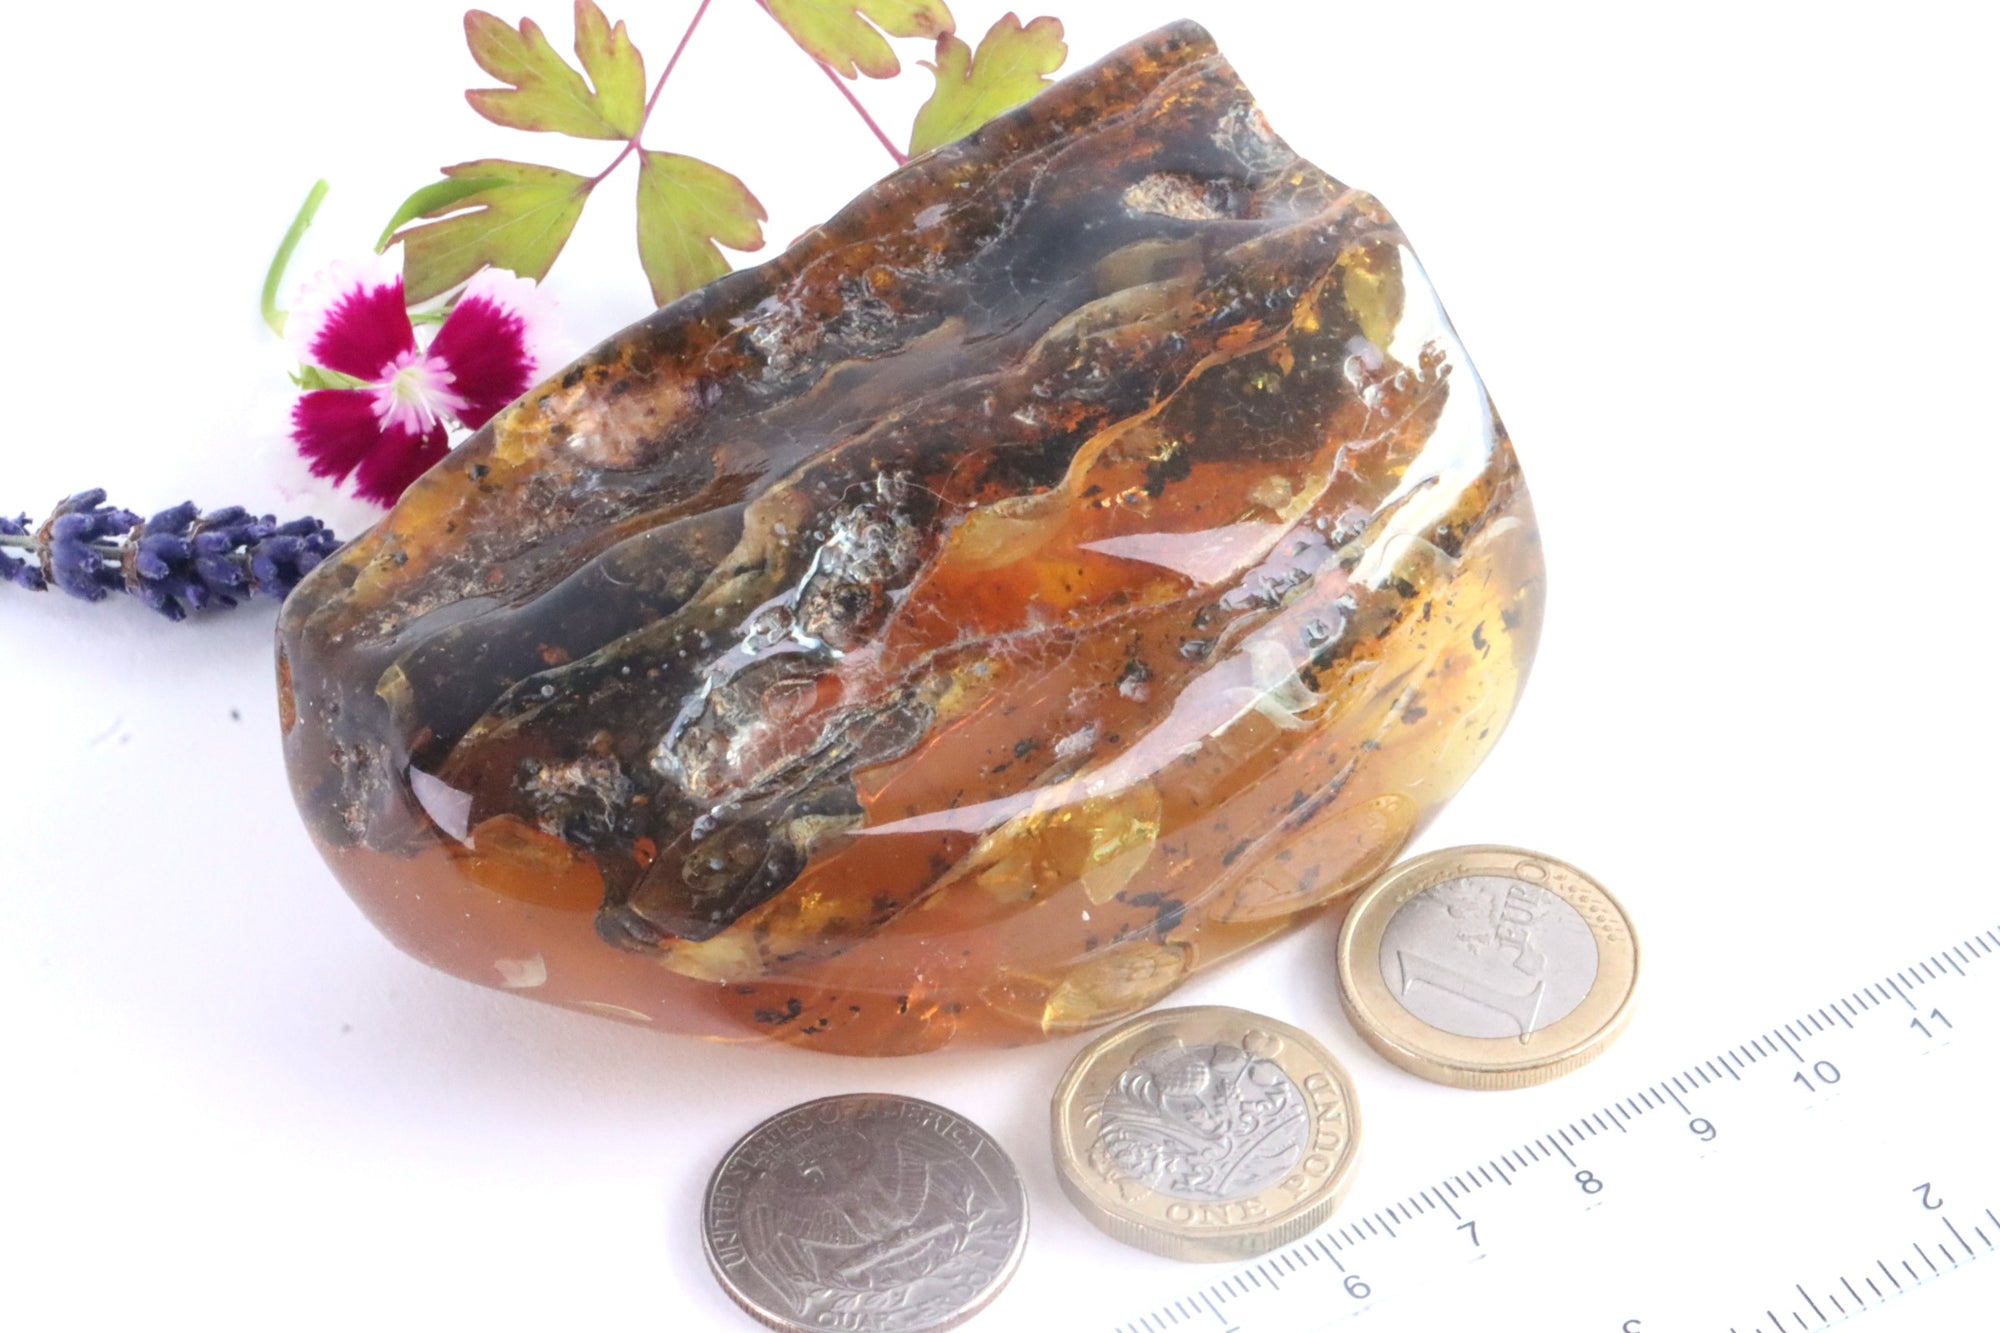 Unbelievable Large 118g Collector's Gem From The Baltic Sea